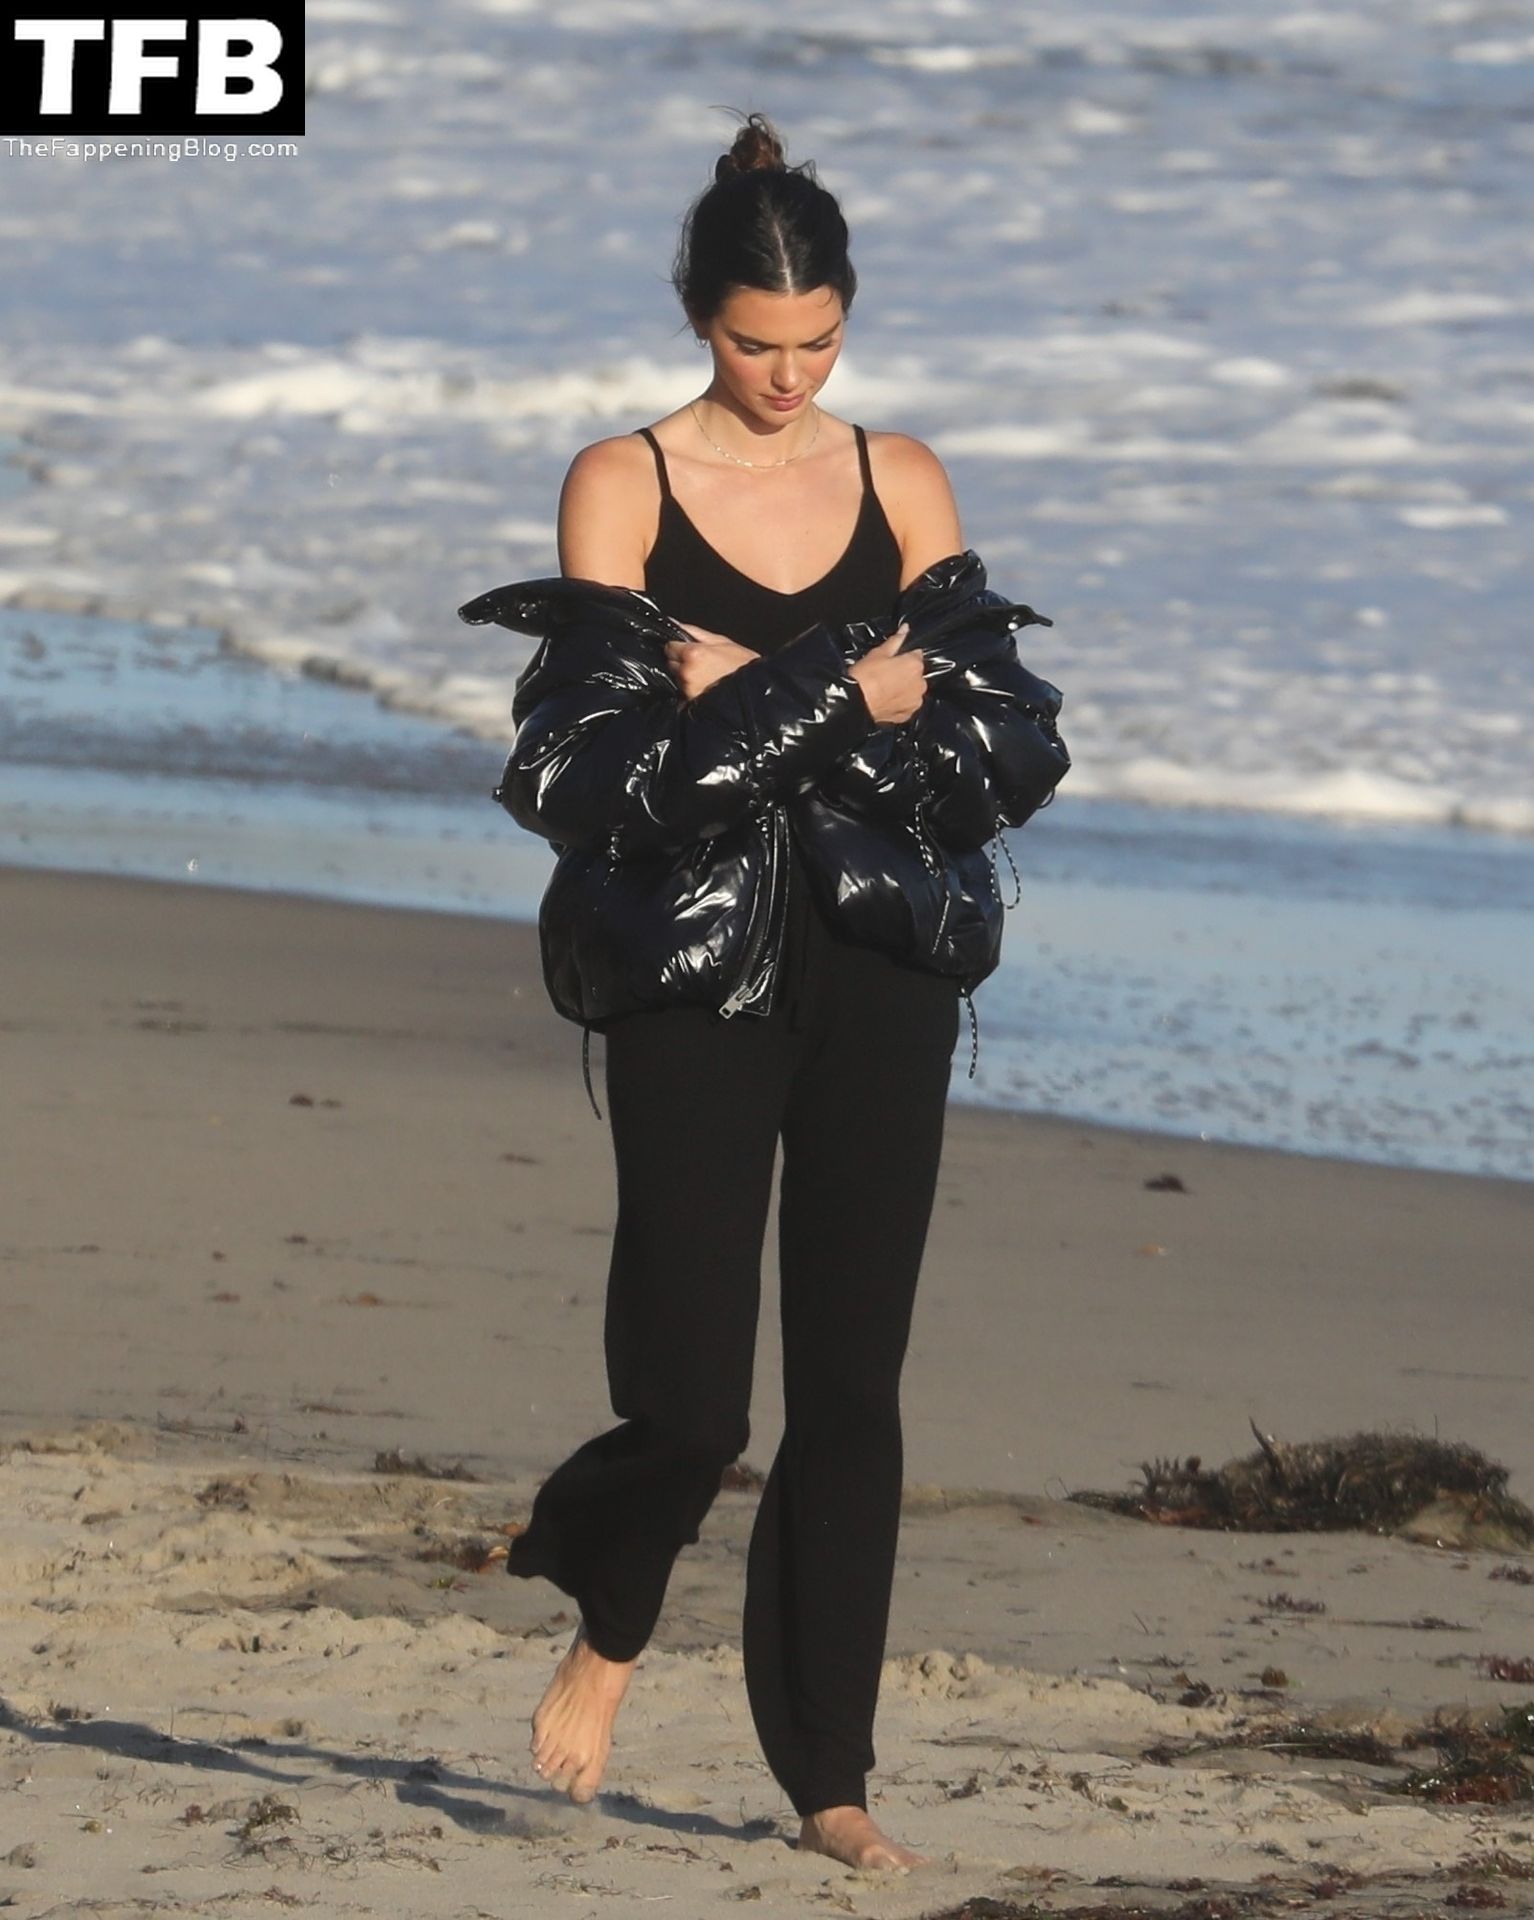 Kendall Jenner Wears Black For a Shoot on the Beach in Malibu (37 Photos)